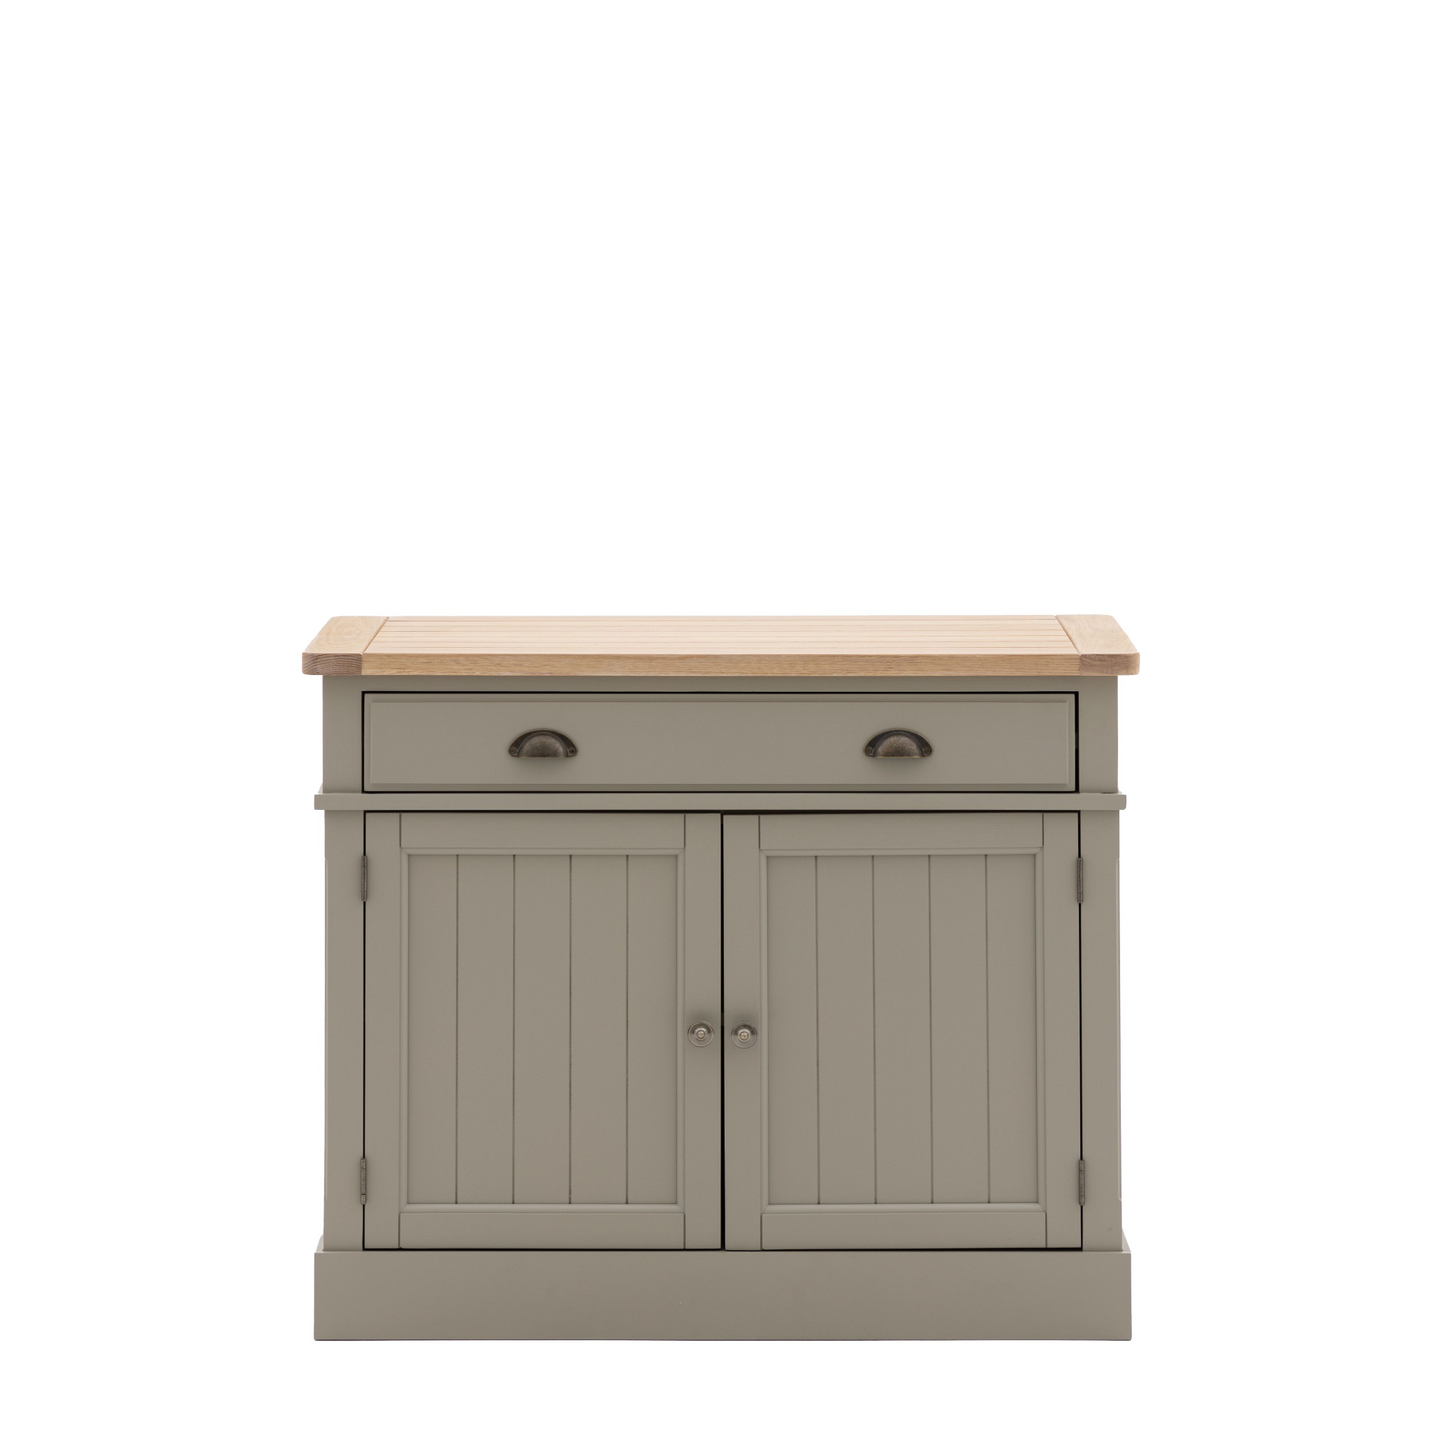 A Prairie sideboard in Interior decor from Kikiathome.co.uk.